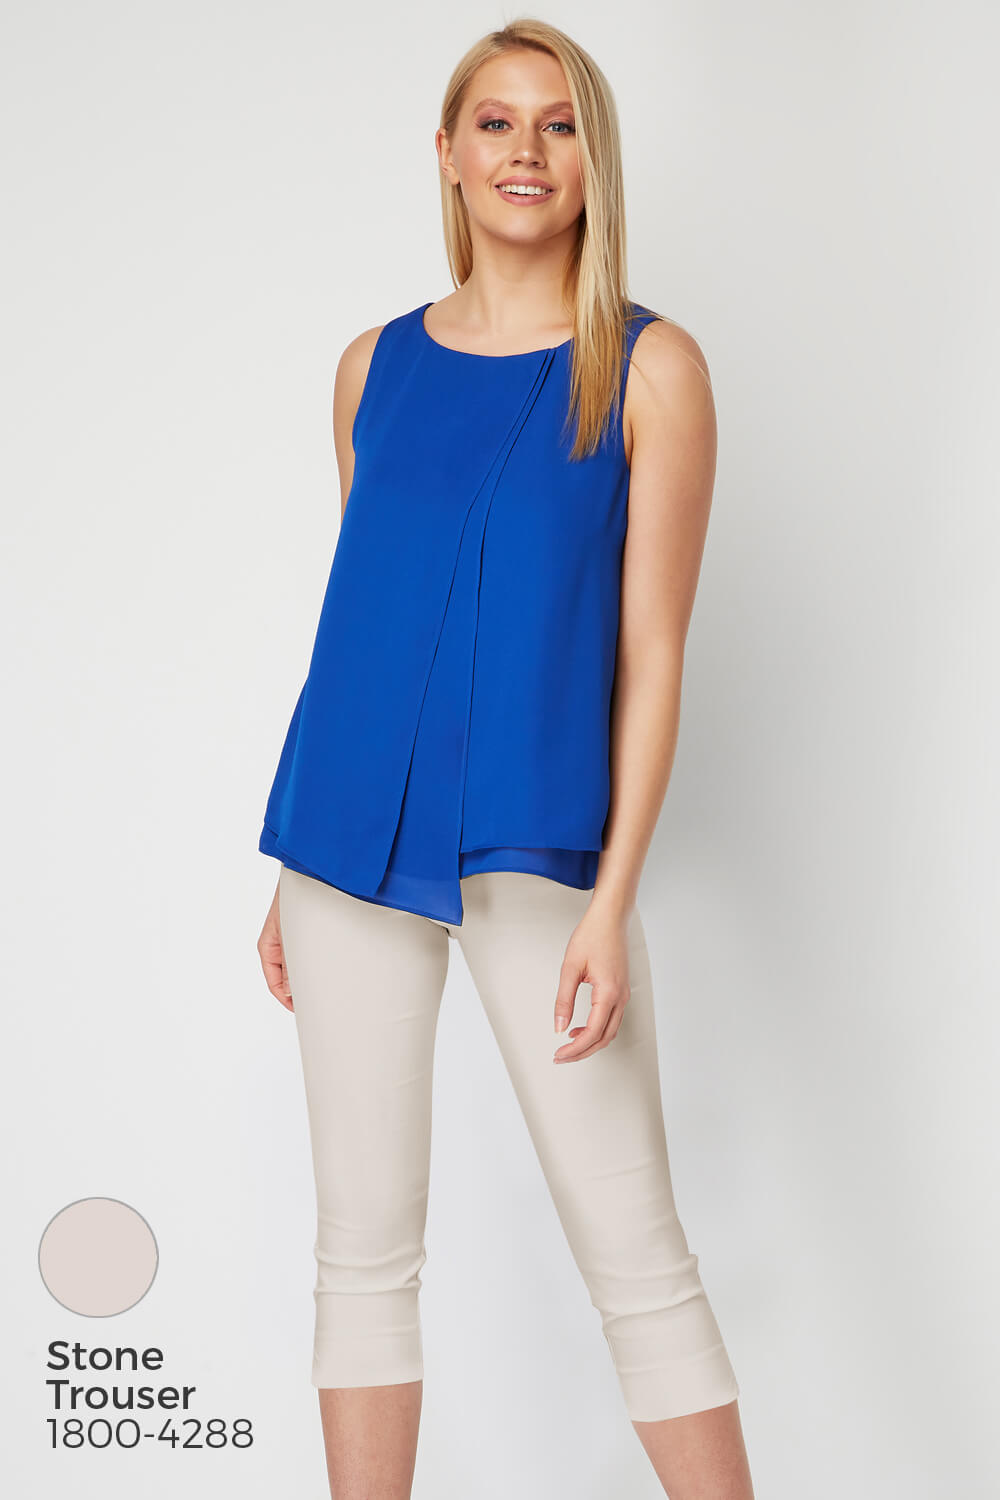 Royal Blue Double Layer Chiffon Top, Image 7 of 8